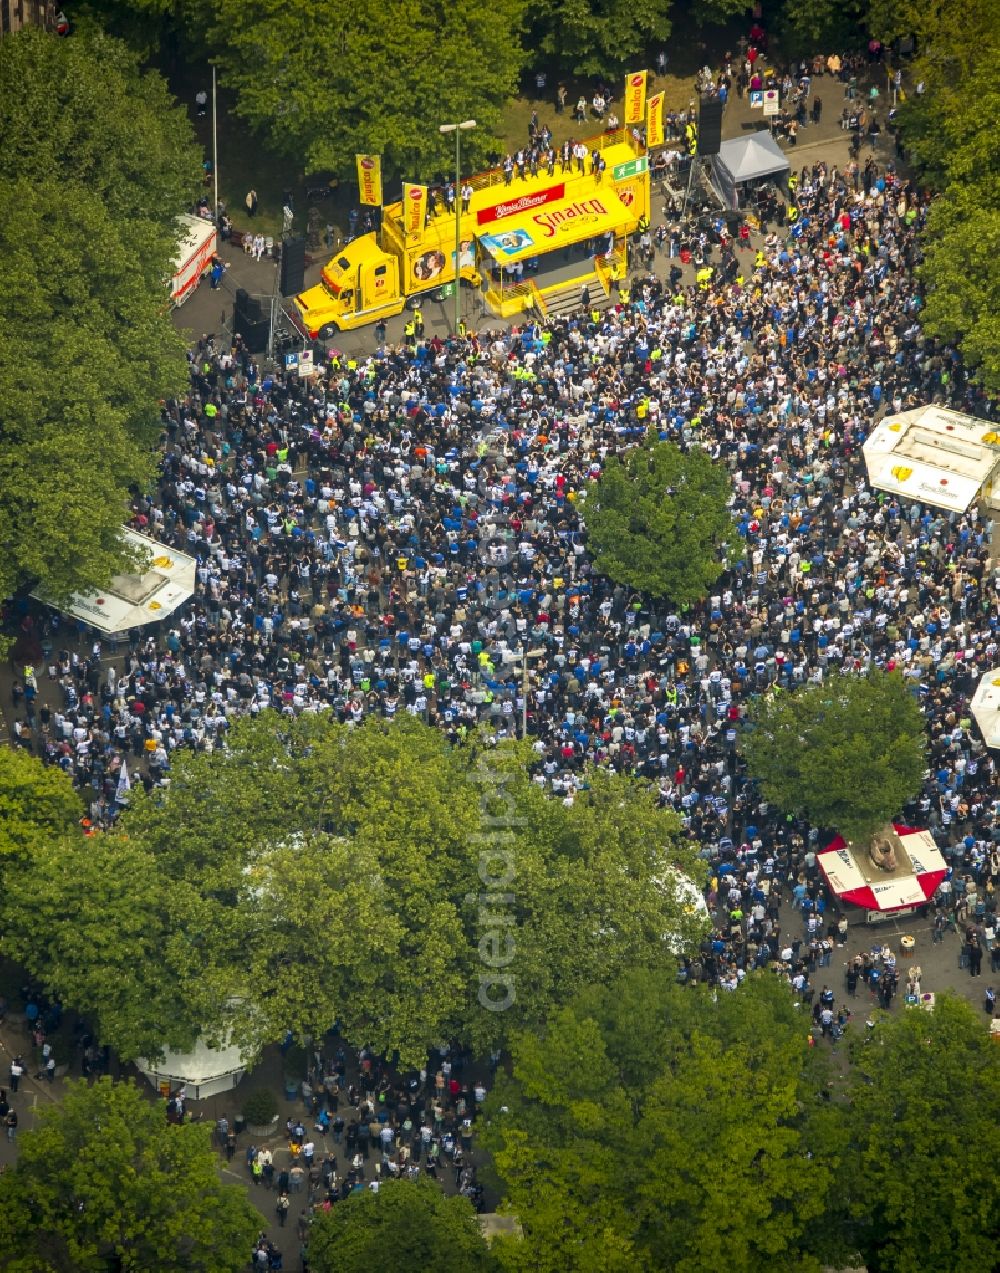 Duisburg from above - MSV fans on the castle square in front of the Duisburg city hall to celebrate the rise of their football team in the 2. Bundesliga in Duisburg in North Rhine-Westphalia